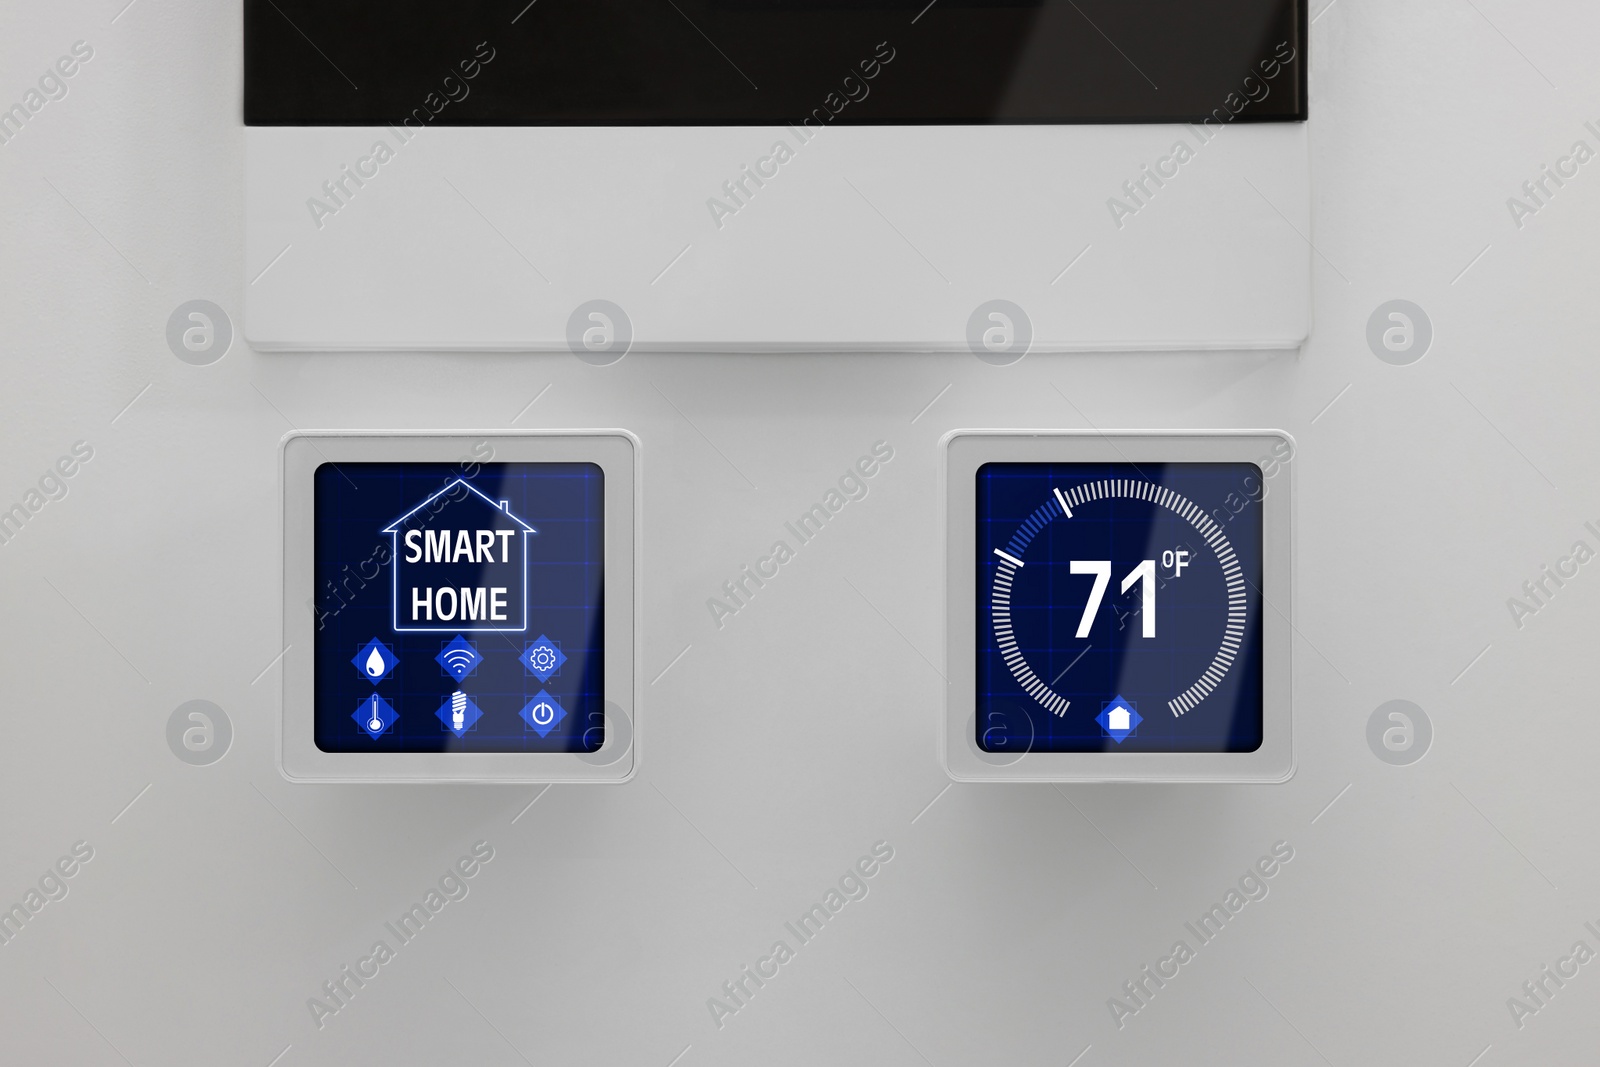 Image of Thermostat displaying temperature in Fahrenheit scale and different icons. Smart home device on white wall